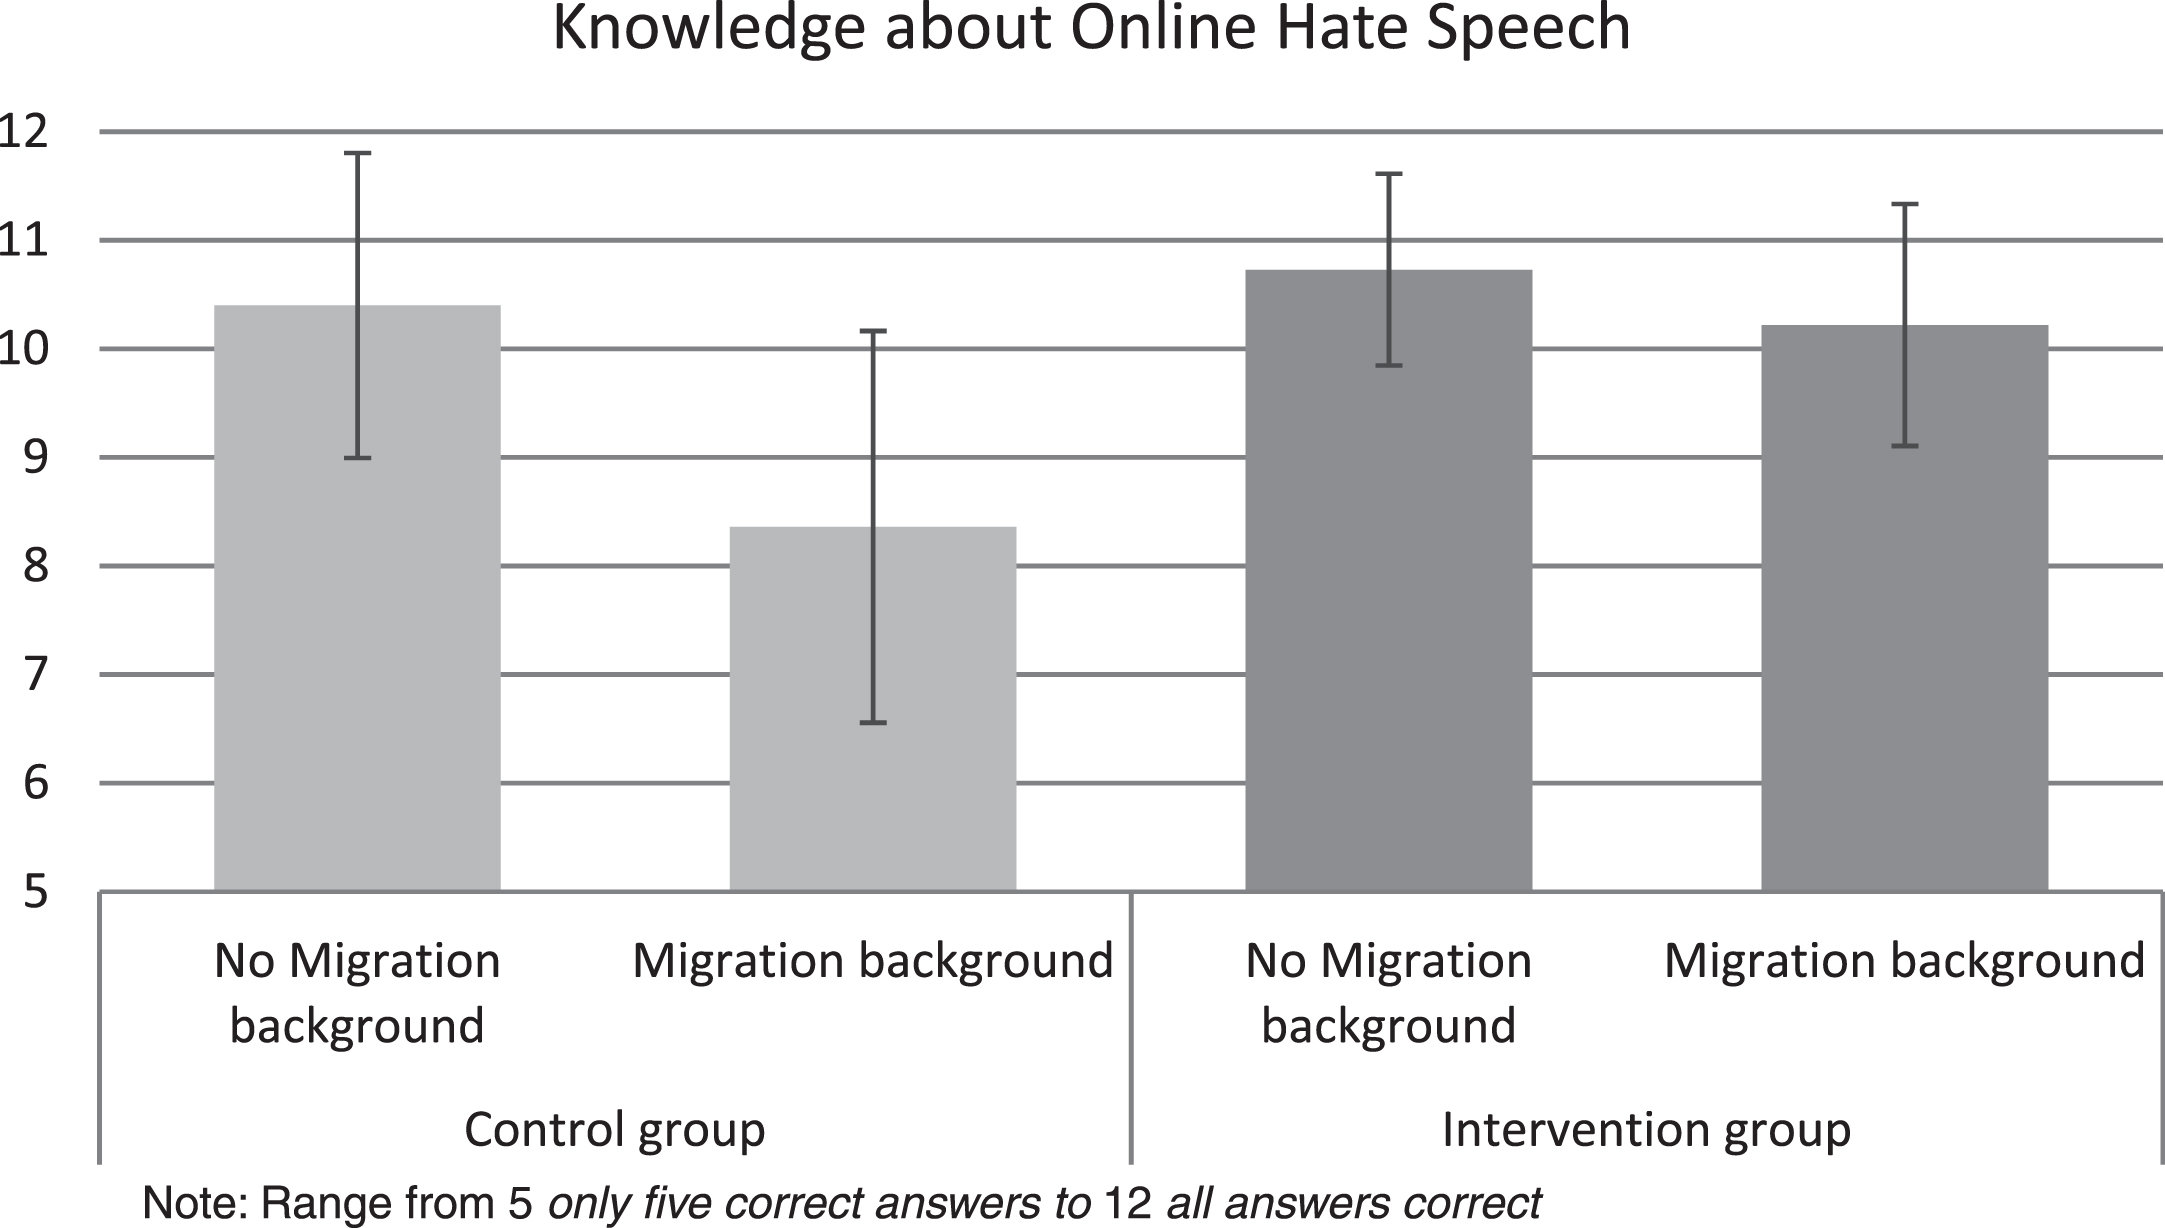 Knowledge About Online Hate Speech in Both Groups Separated by Migration Background